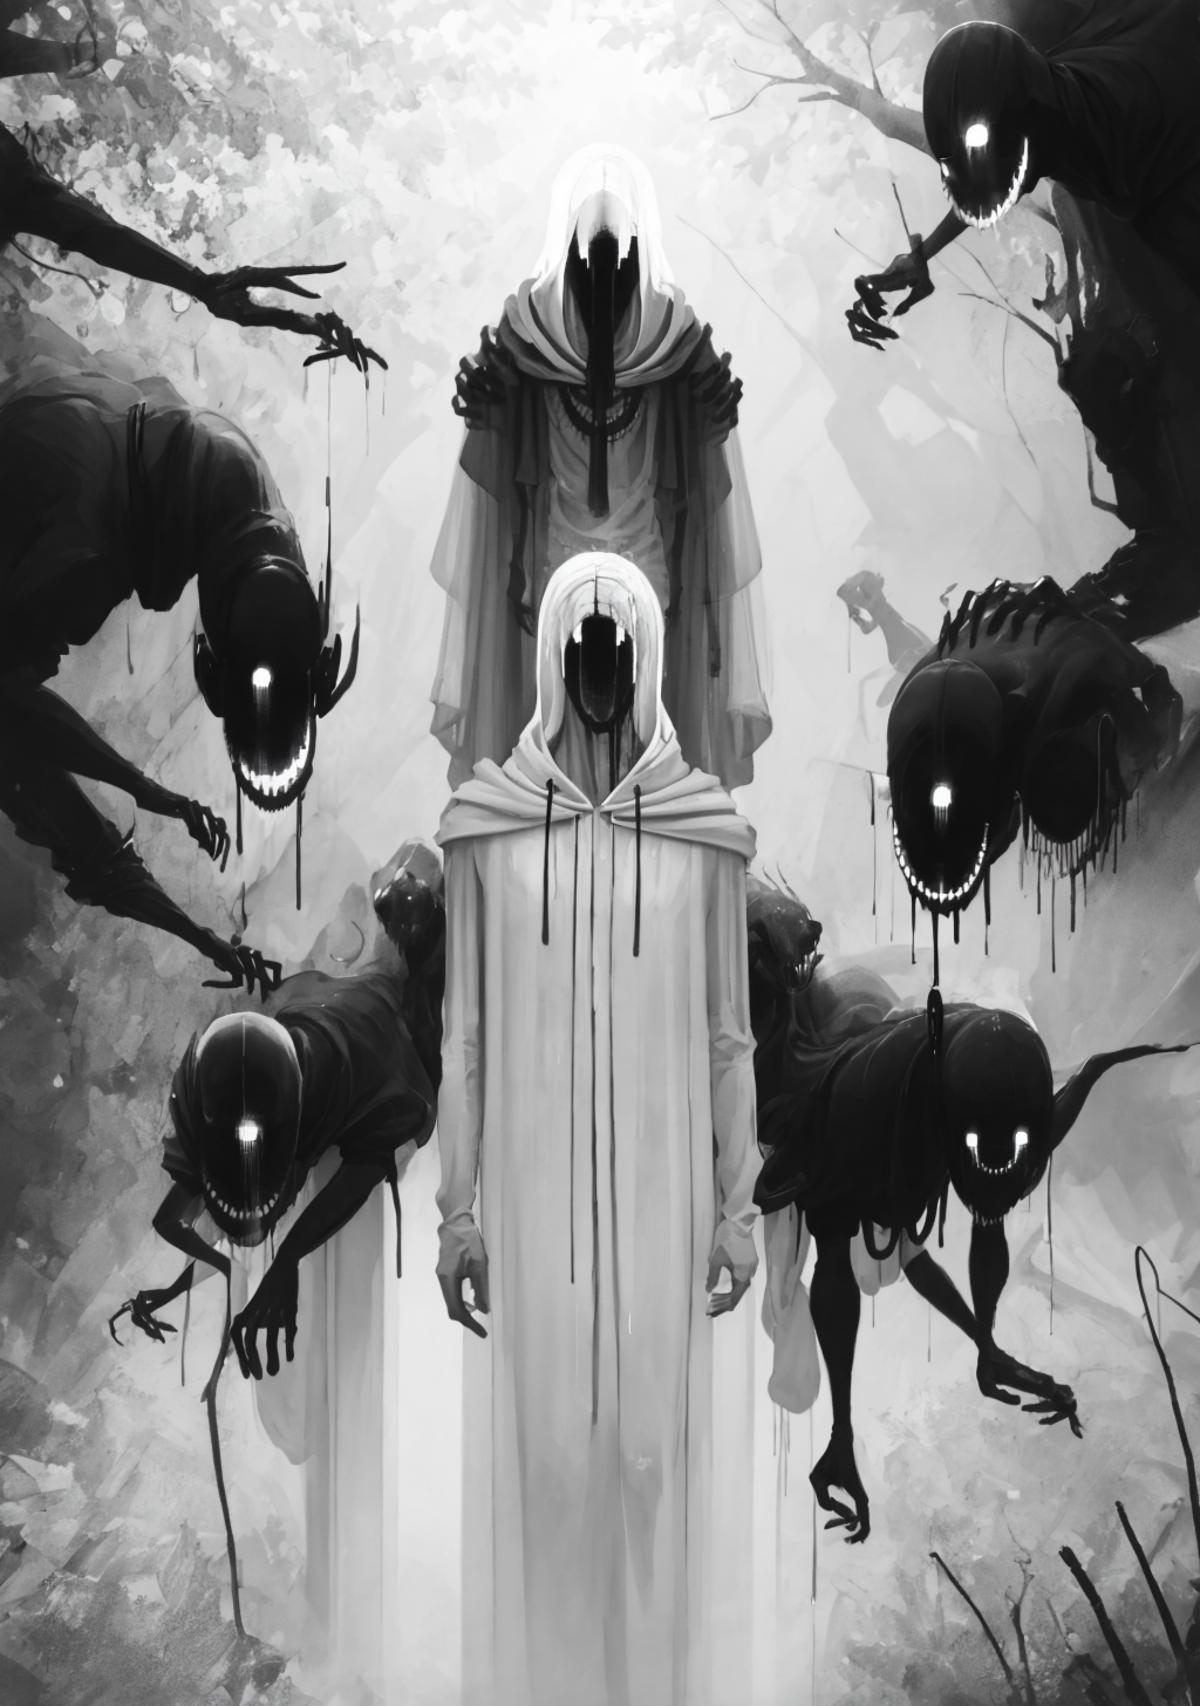 A drawing of a person in a white robe surrounded by creepy monsters.